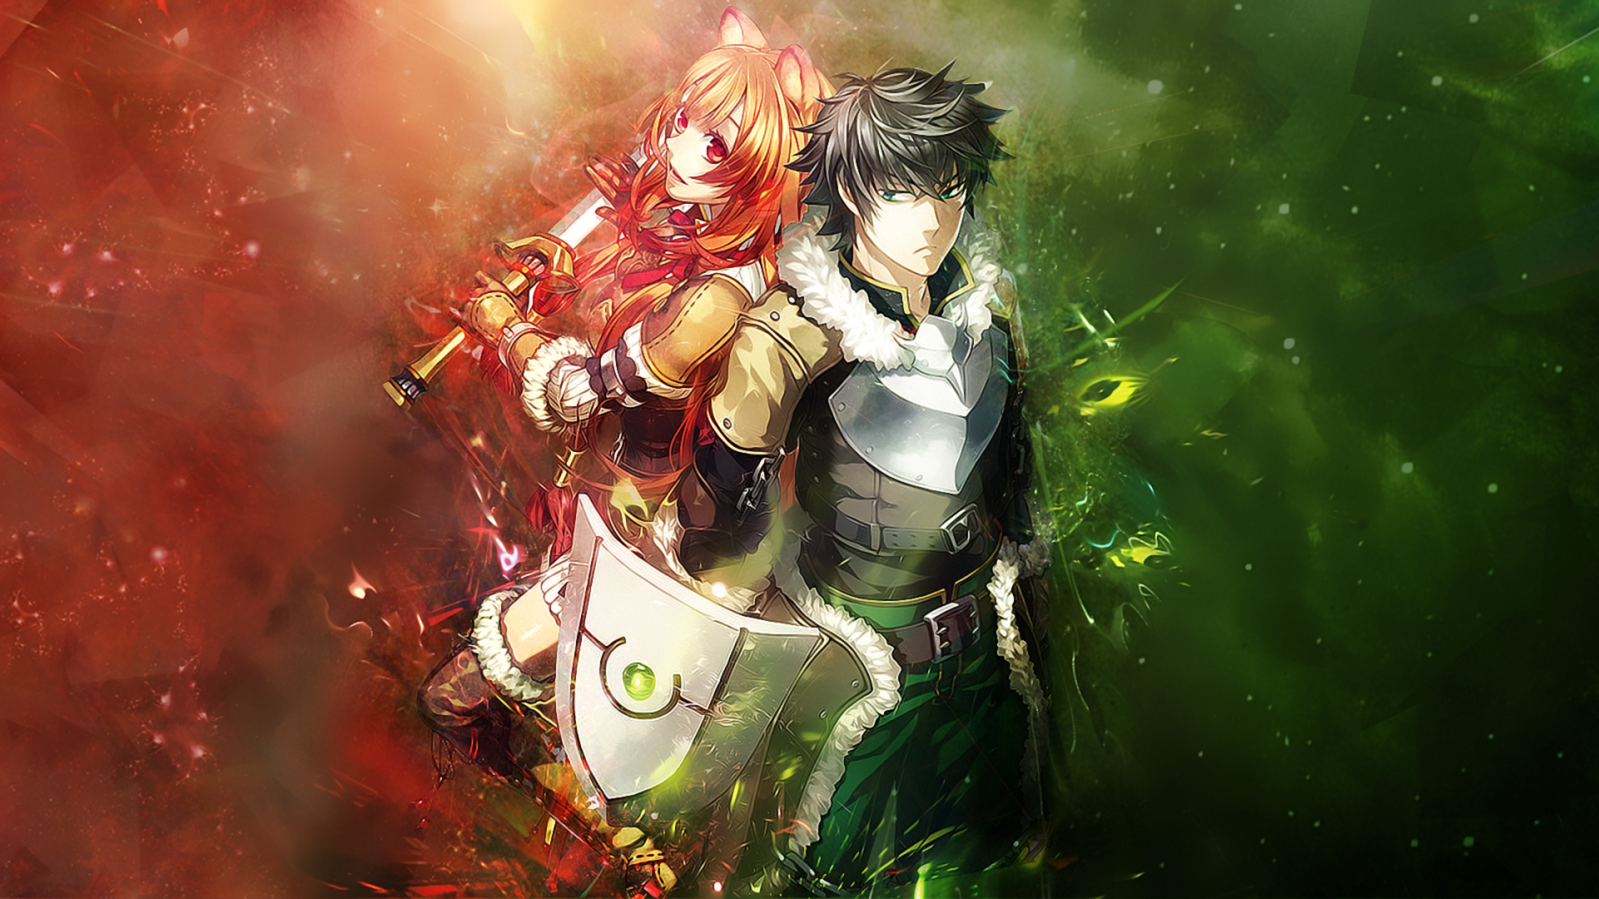 The Shield Hero - An Epic Journey Begins